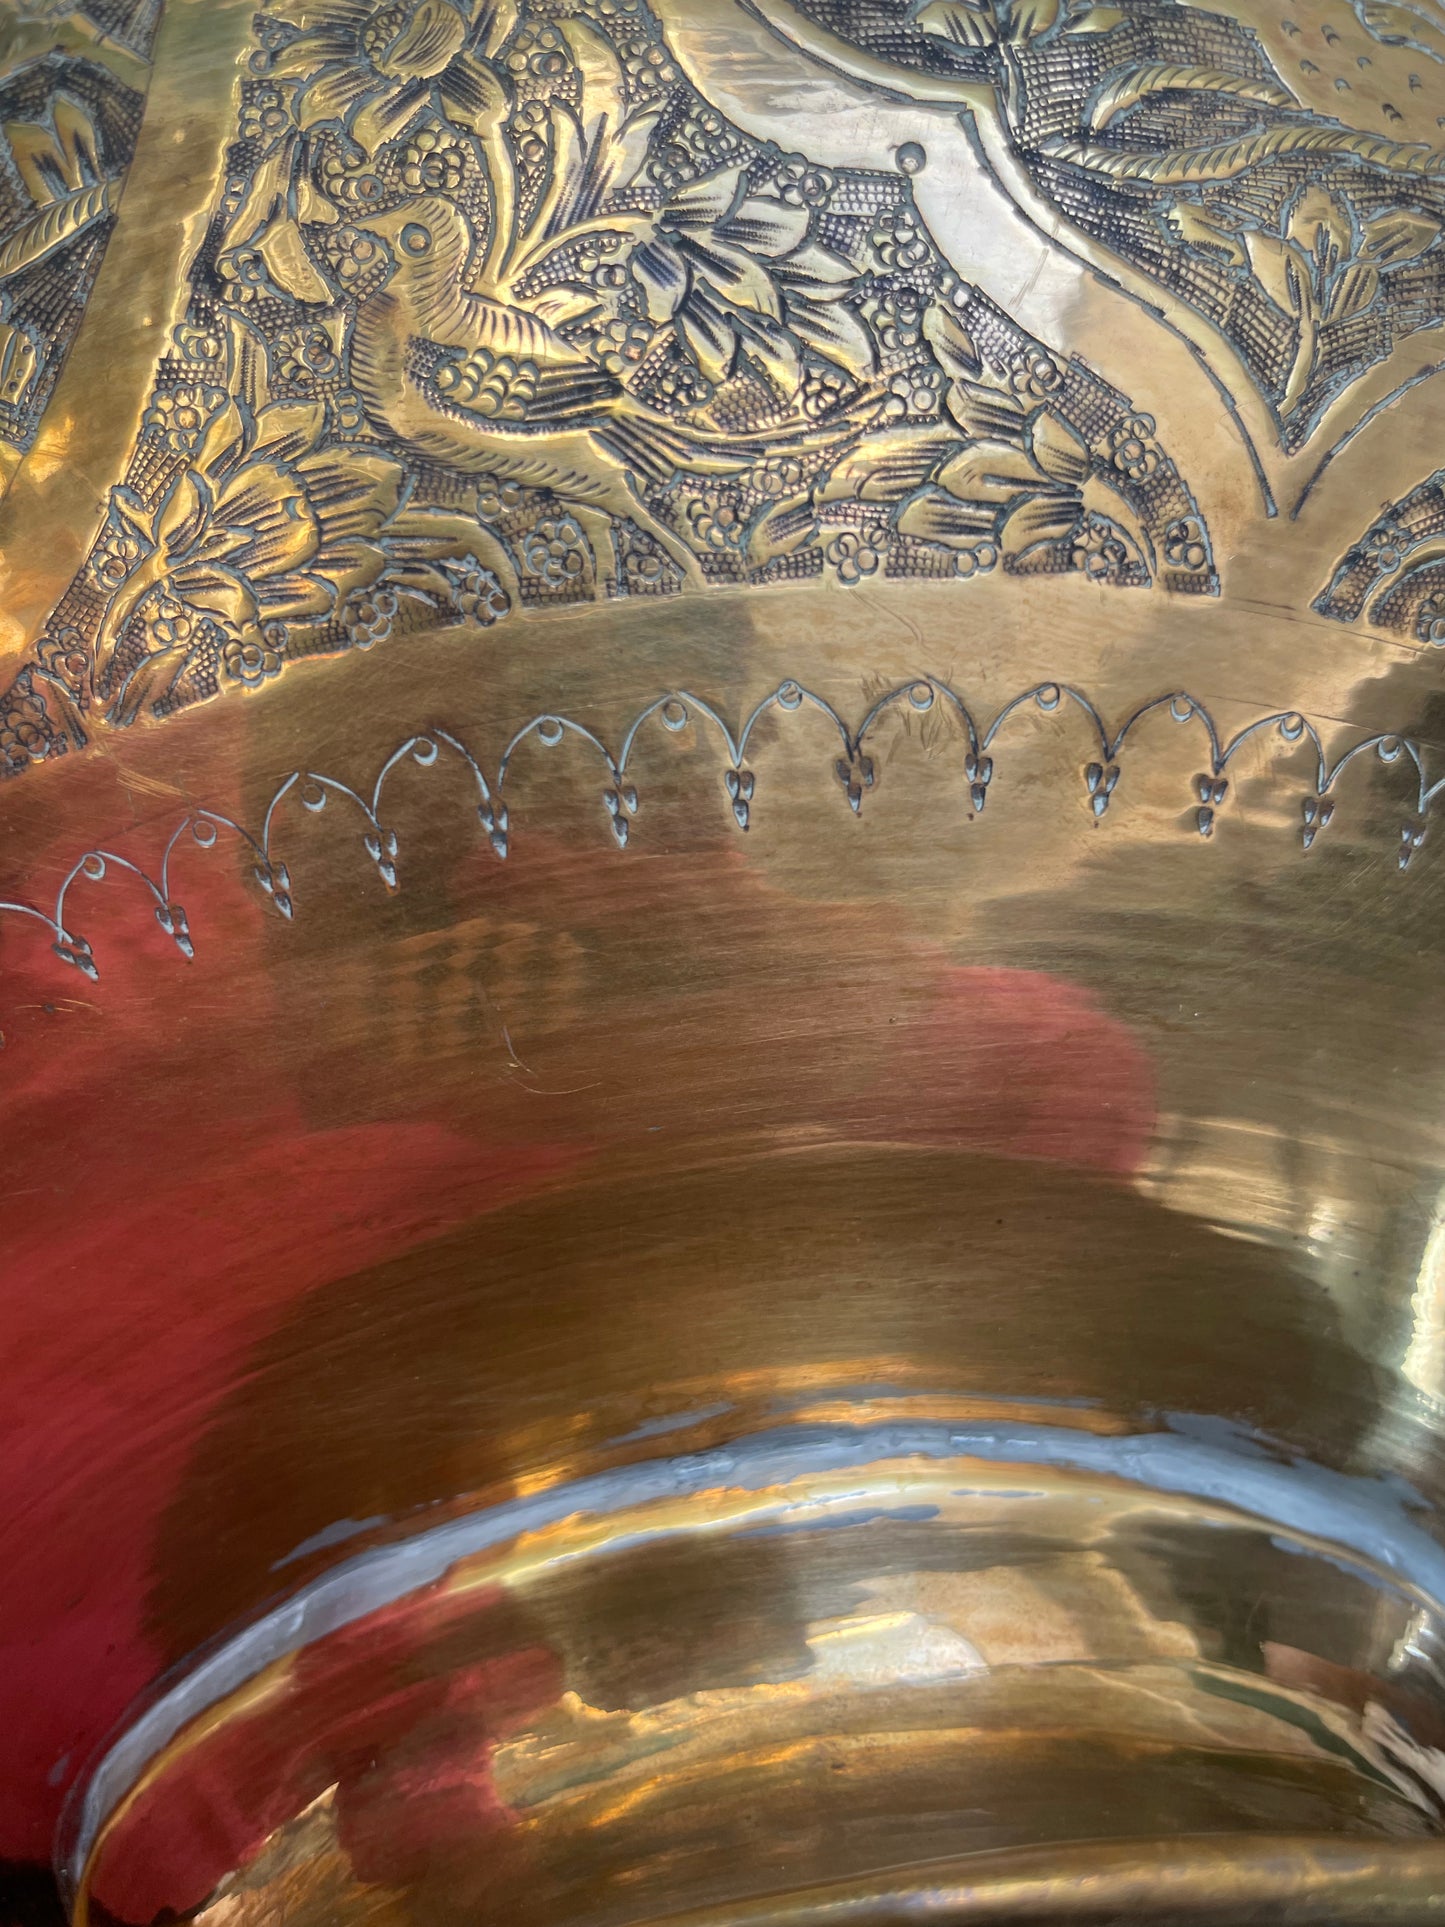 Vintage Footed Engraved Brass Bowl